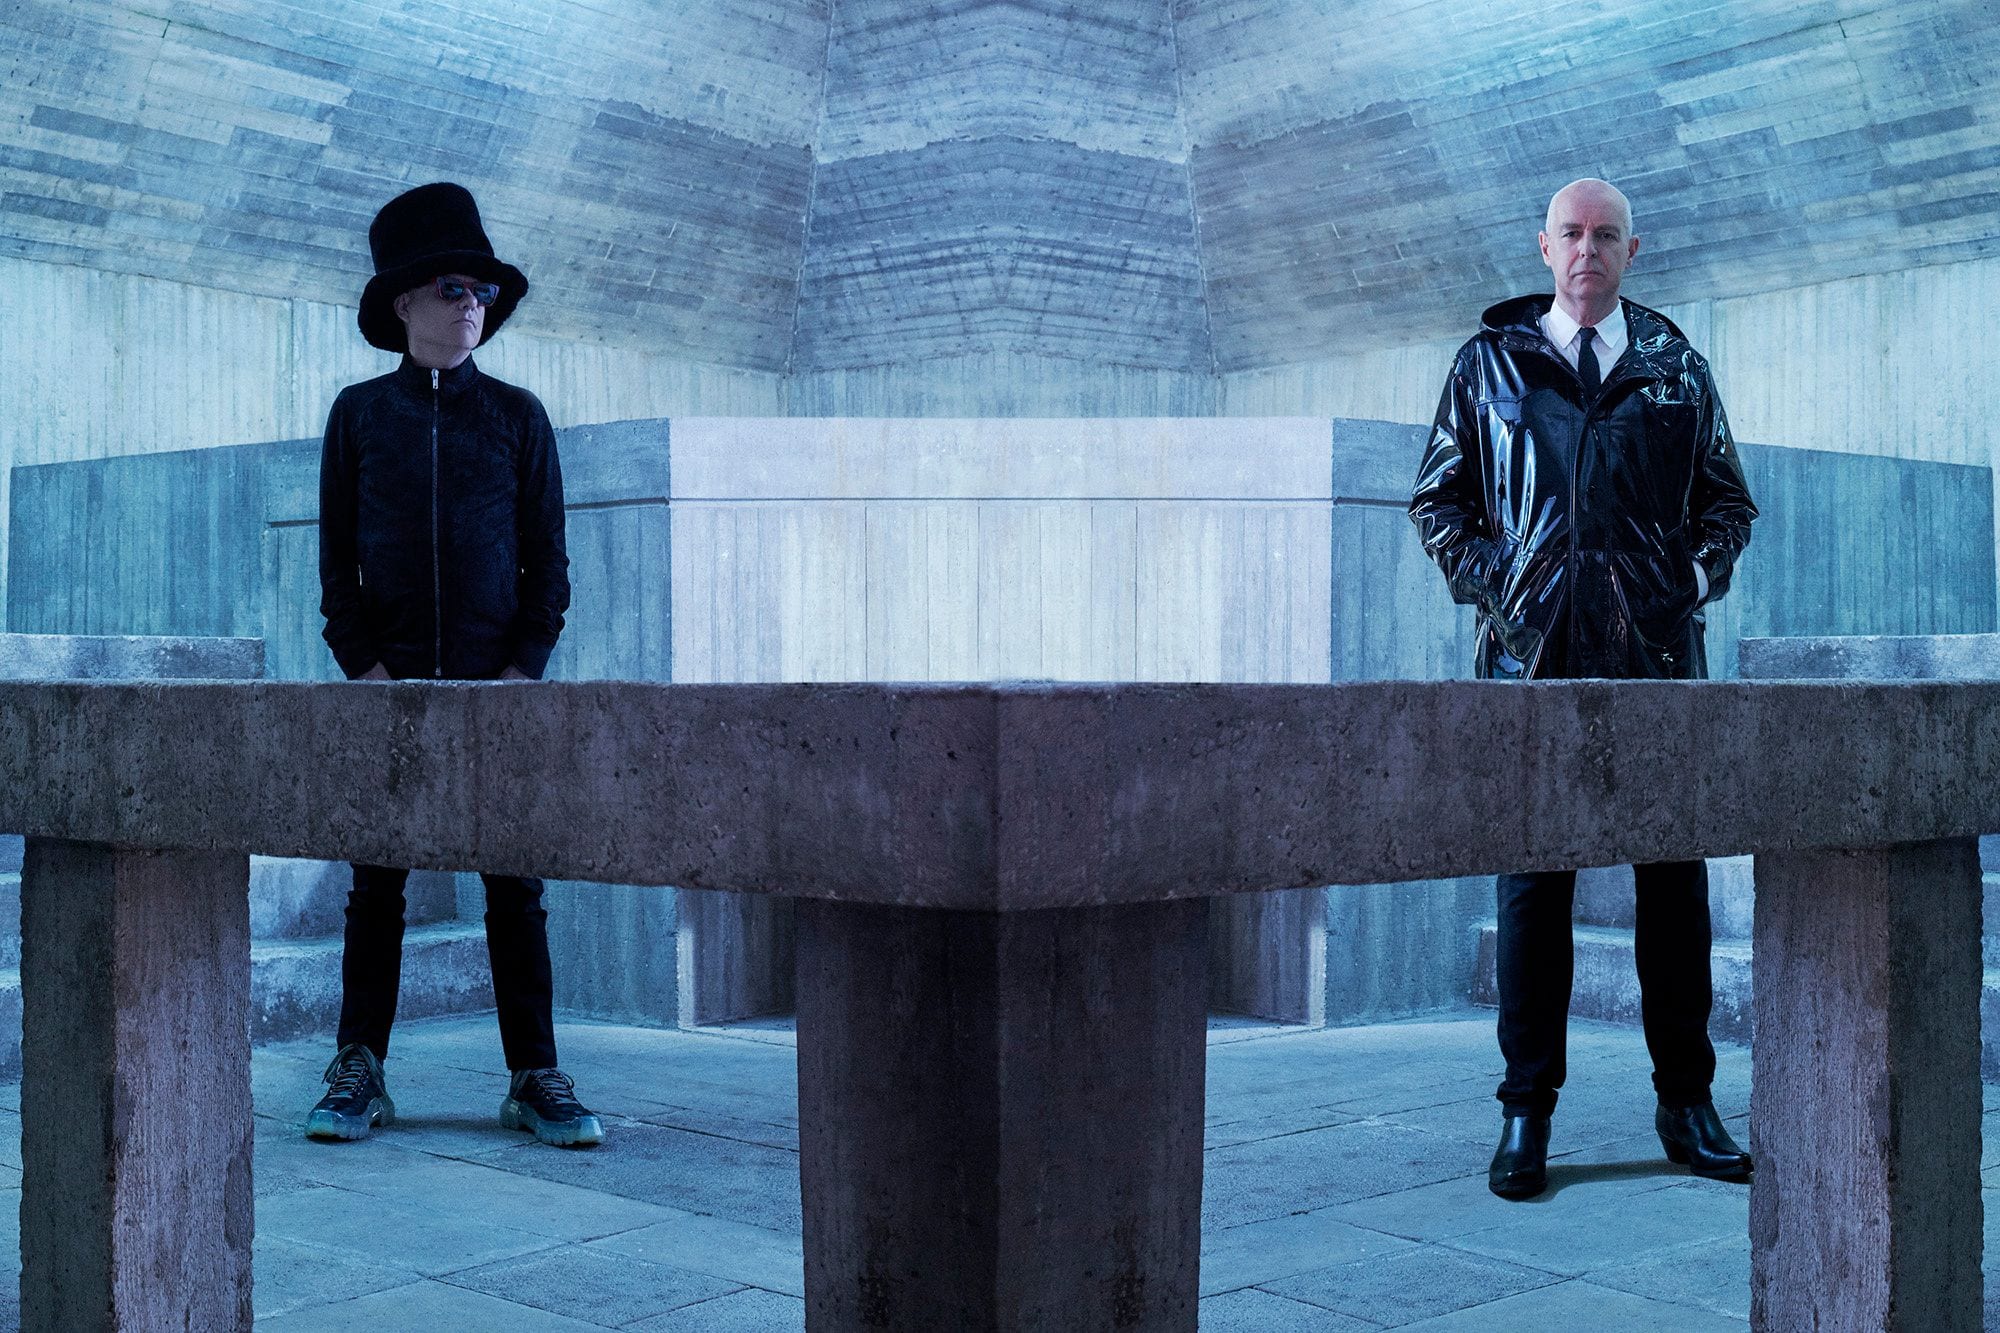 Pet Shop Boys Deliver Another Glorious, Smart, and Relevant Pop Album with ‘Hotspot’